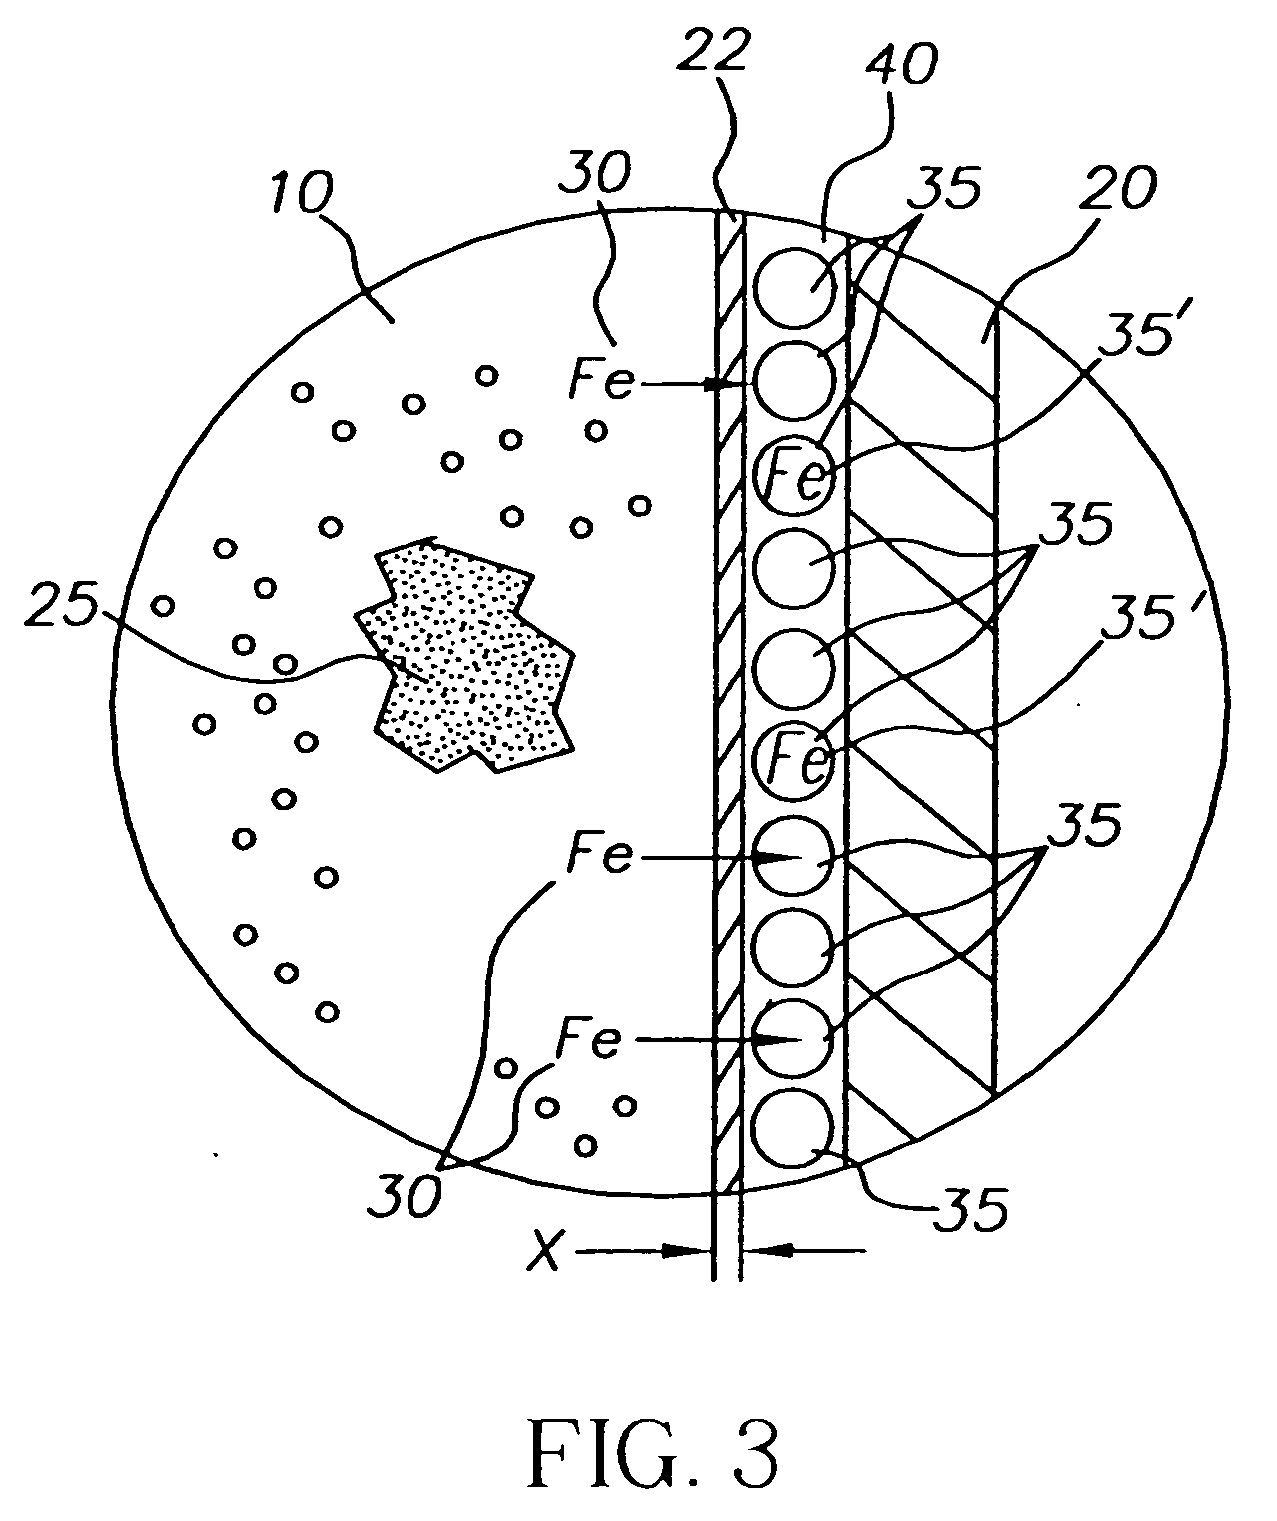 Container for inhibiting microbial growth in liquid nutrients